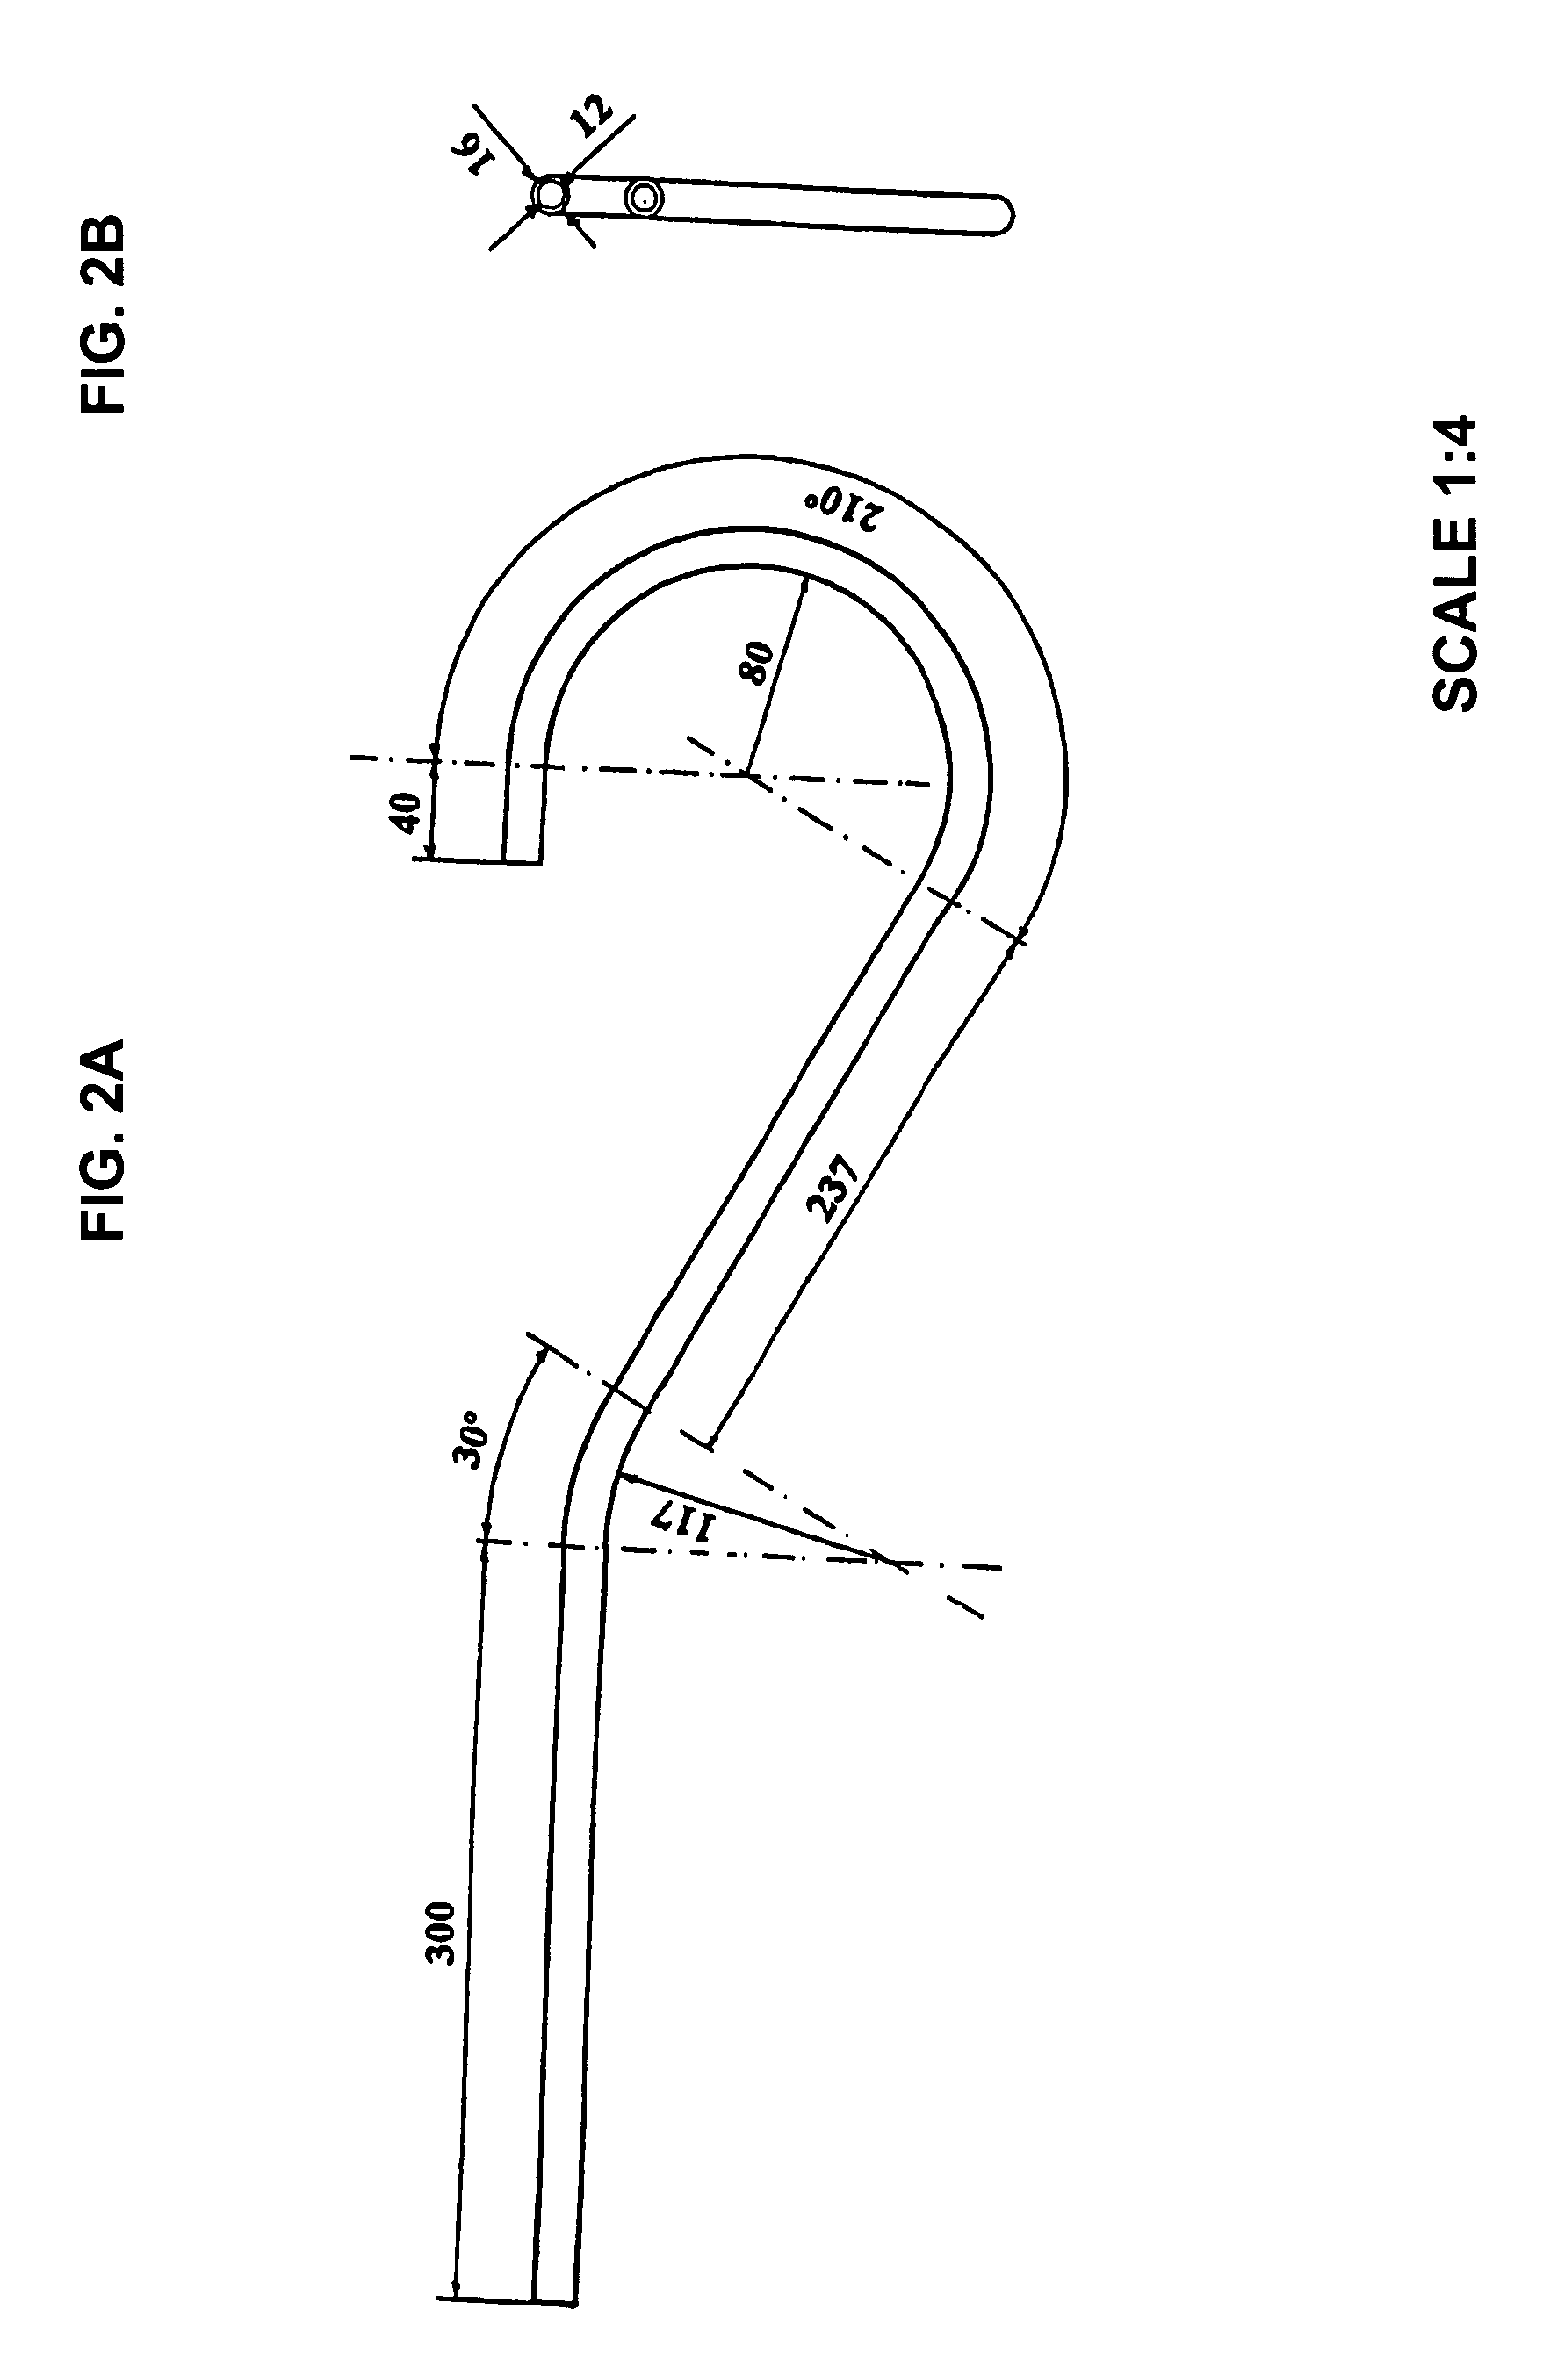 Adjustable safety distance spacer for bicycles